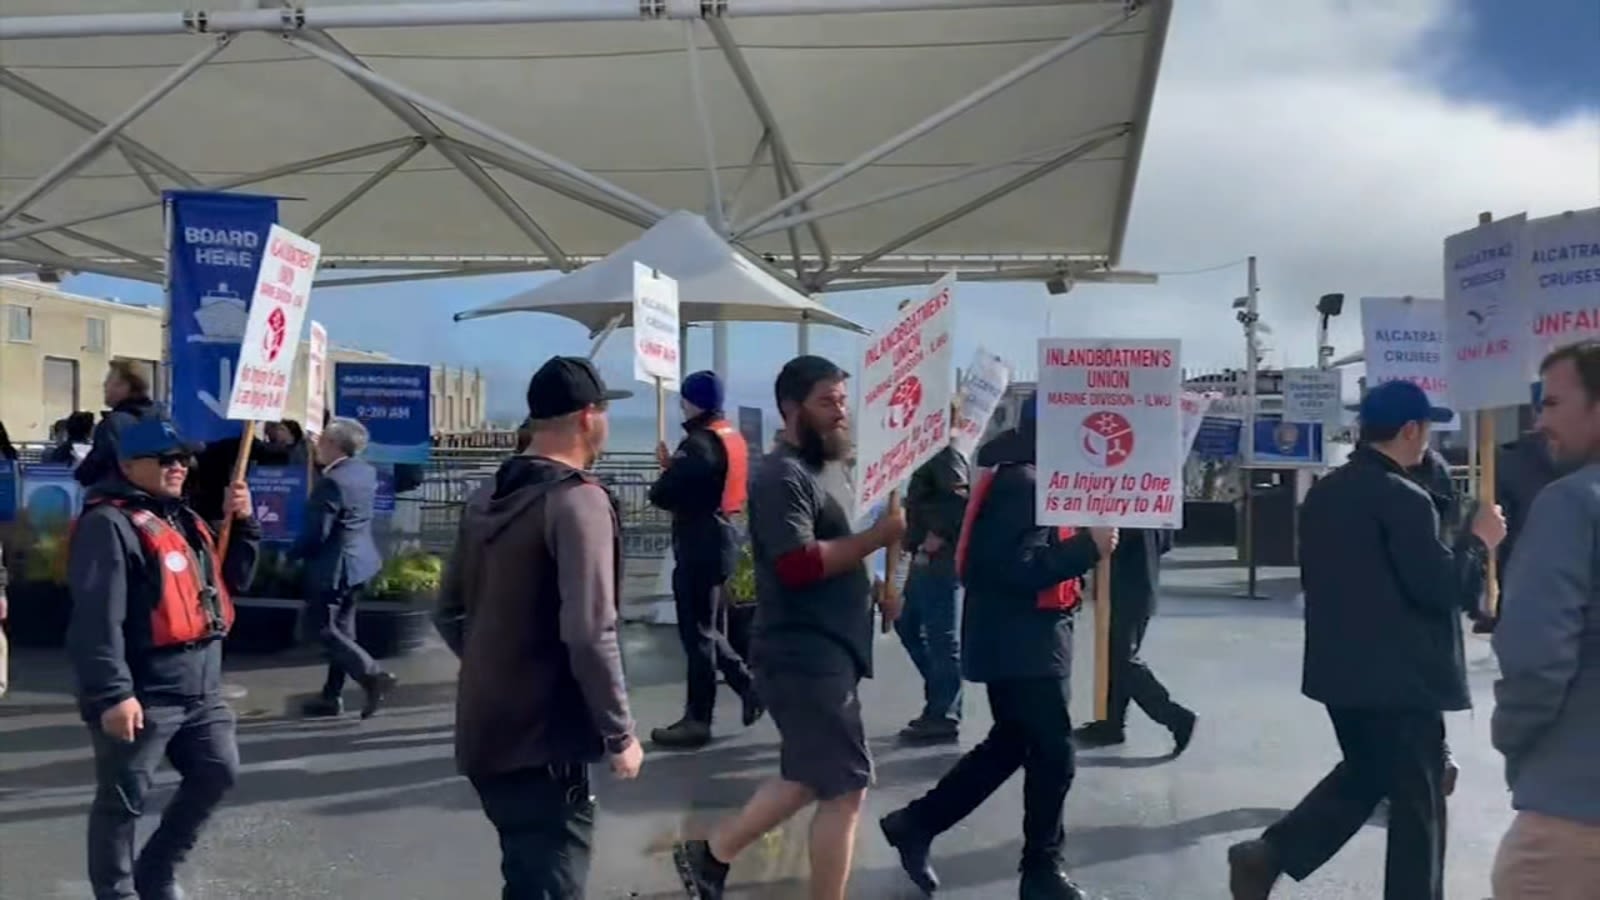 Alcatraz ferry workers strike for fair wages as SF summer tourism season starts